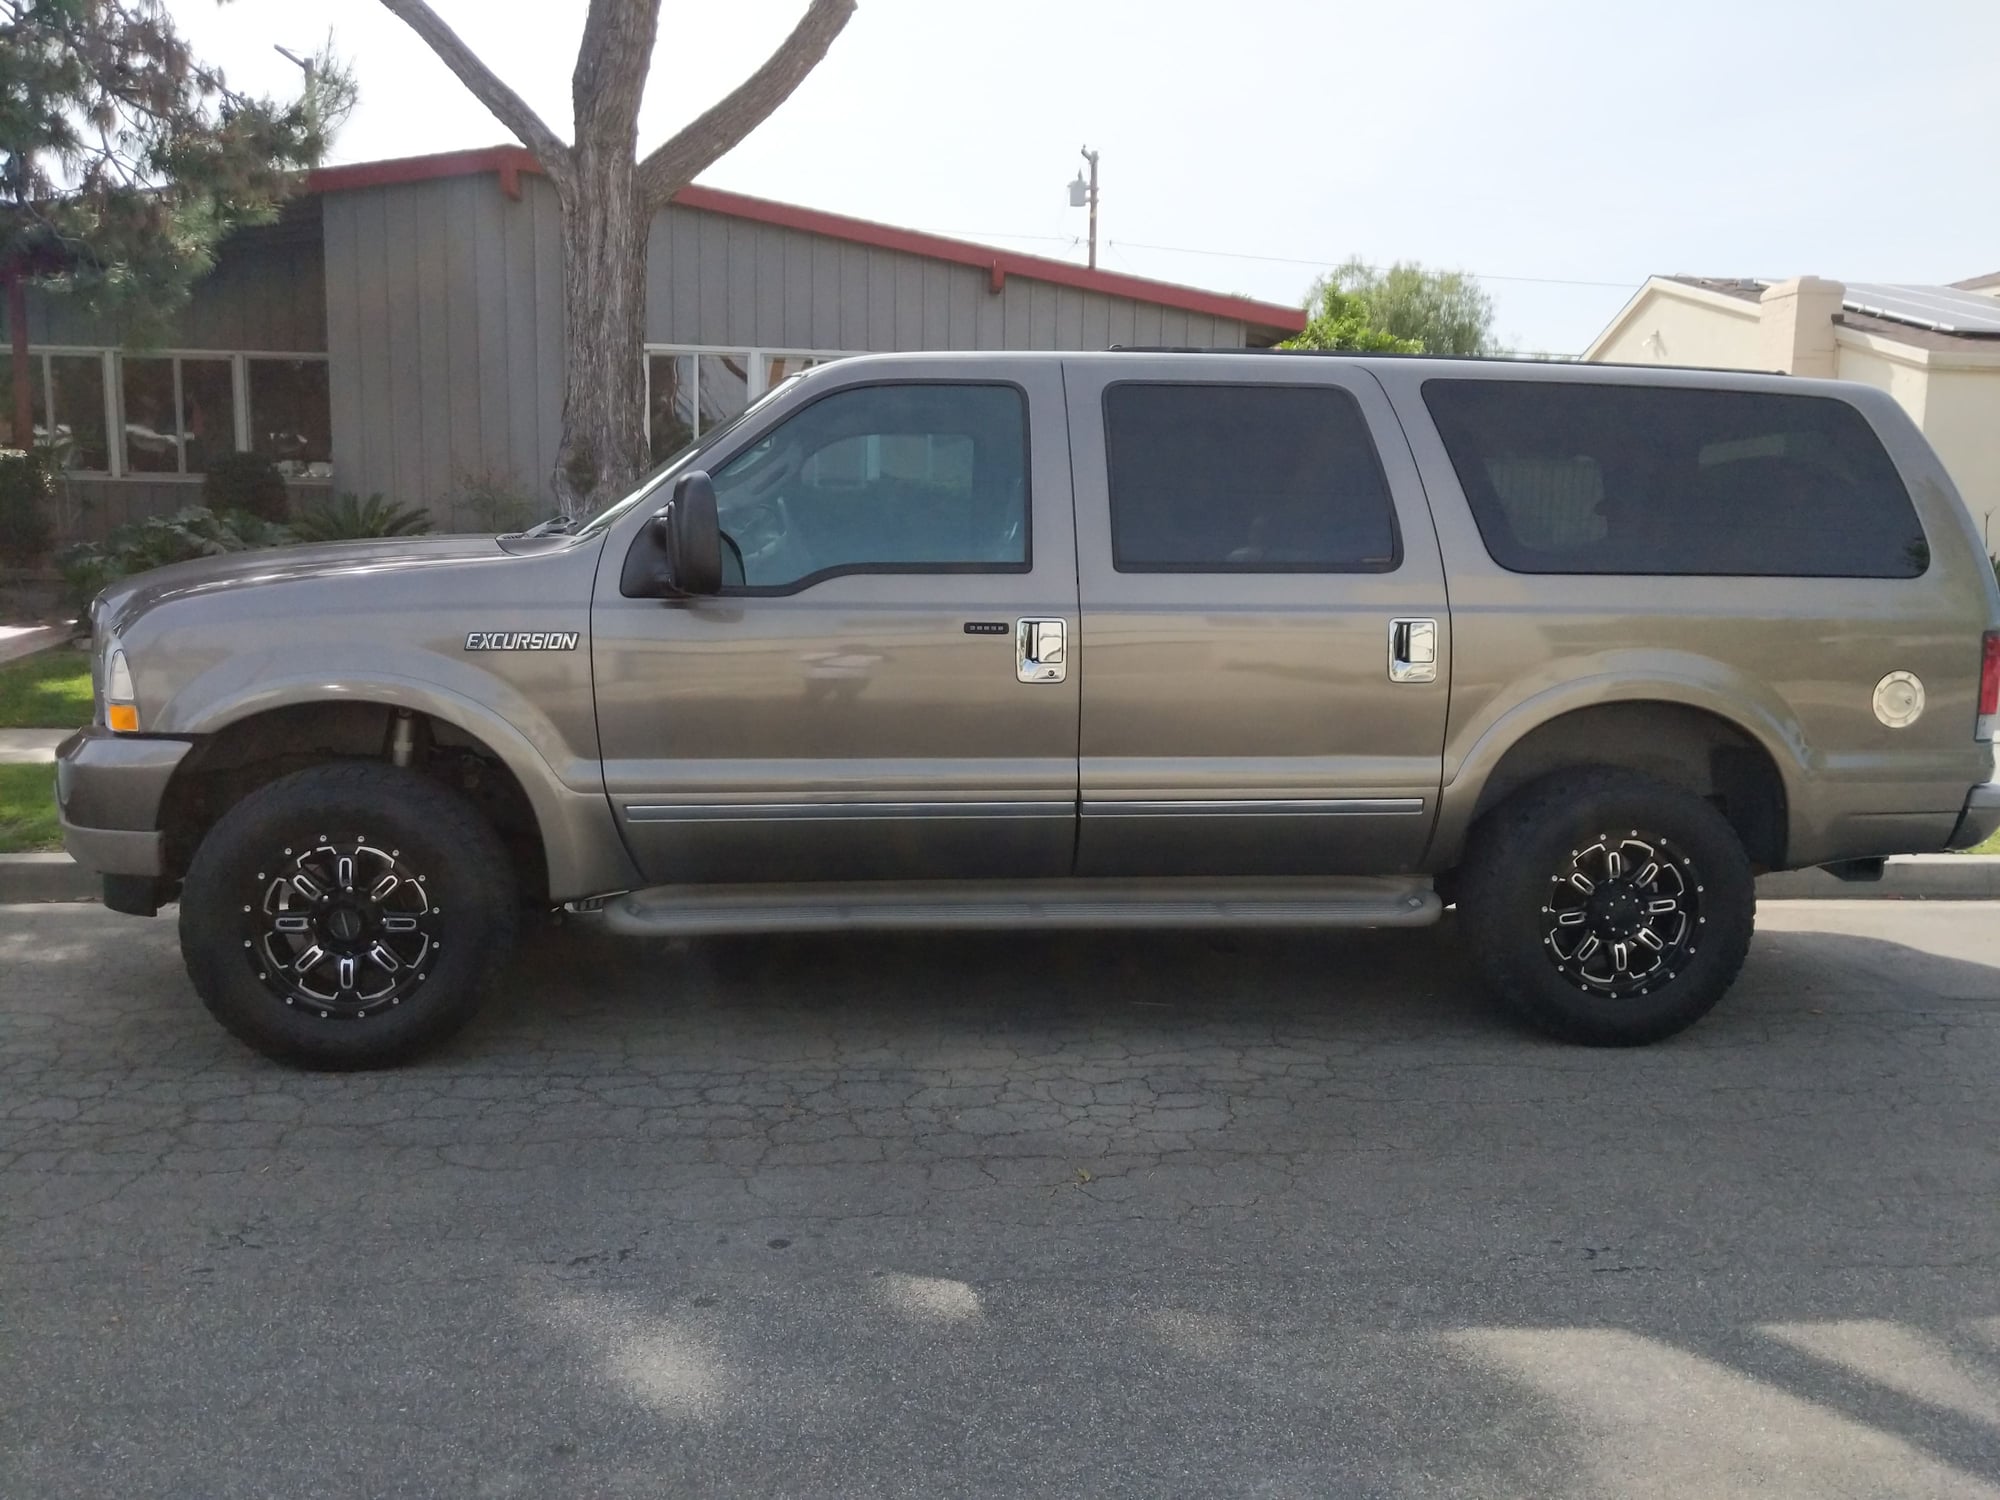 Wheels and Tires/Axles - Gear 18" with Wildpeak A/T 285/65 - Used - All Years Ford Excursion - All Years Ford 3/4 Ton Pickup - All Years Ford 1 Ton Pickup - Long Beach, CA 90815, United States